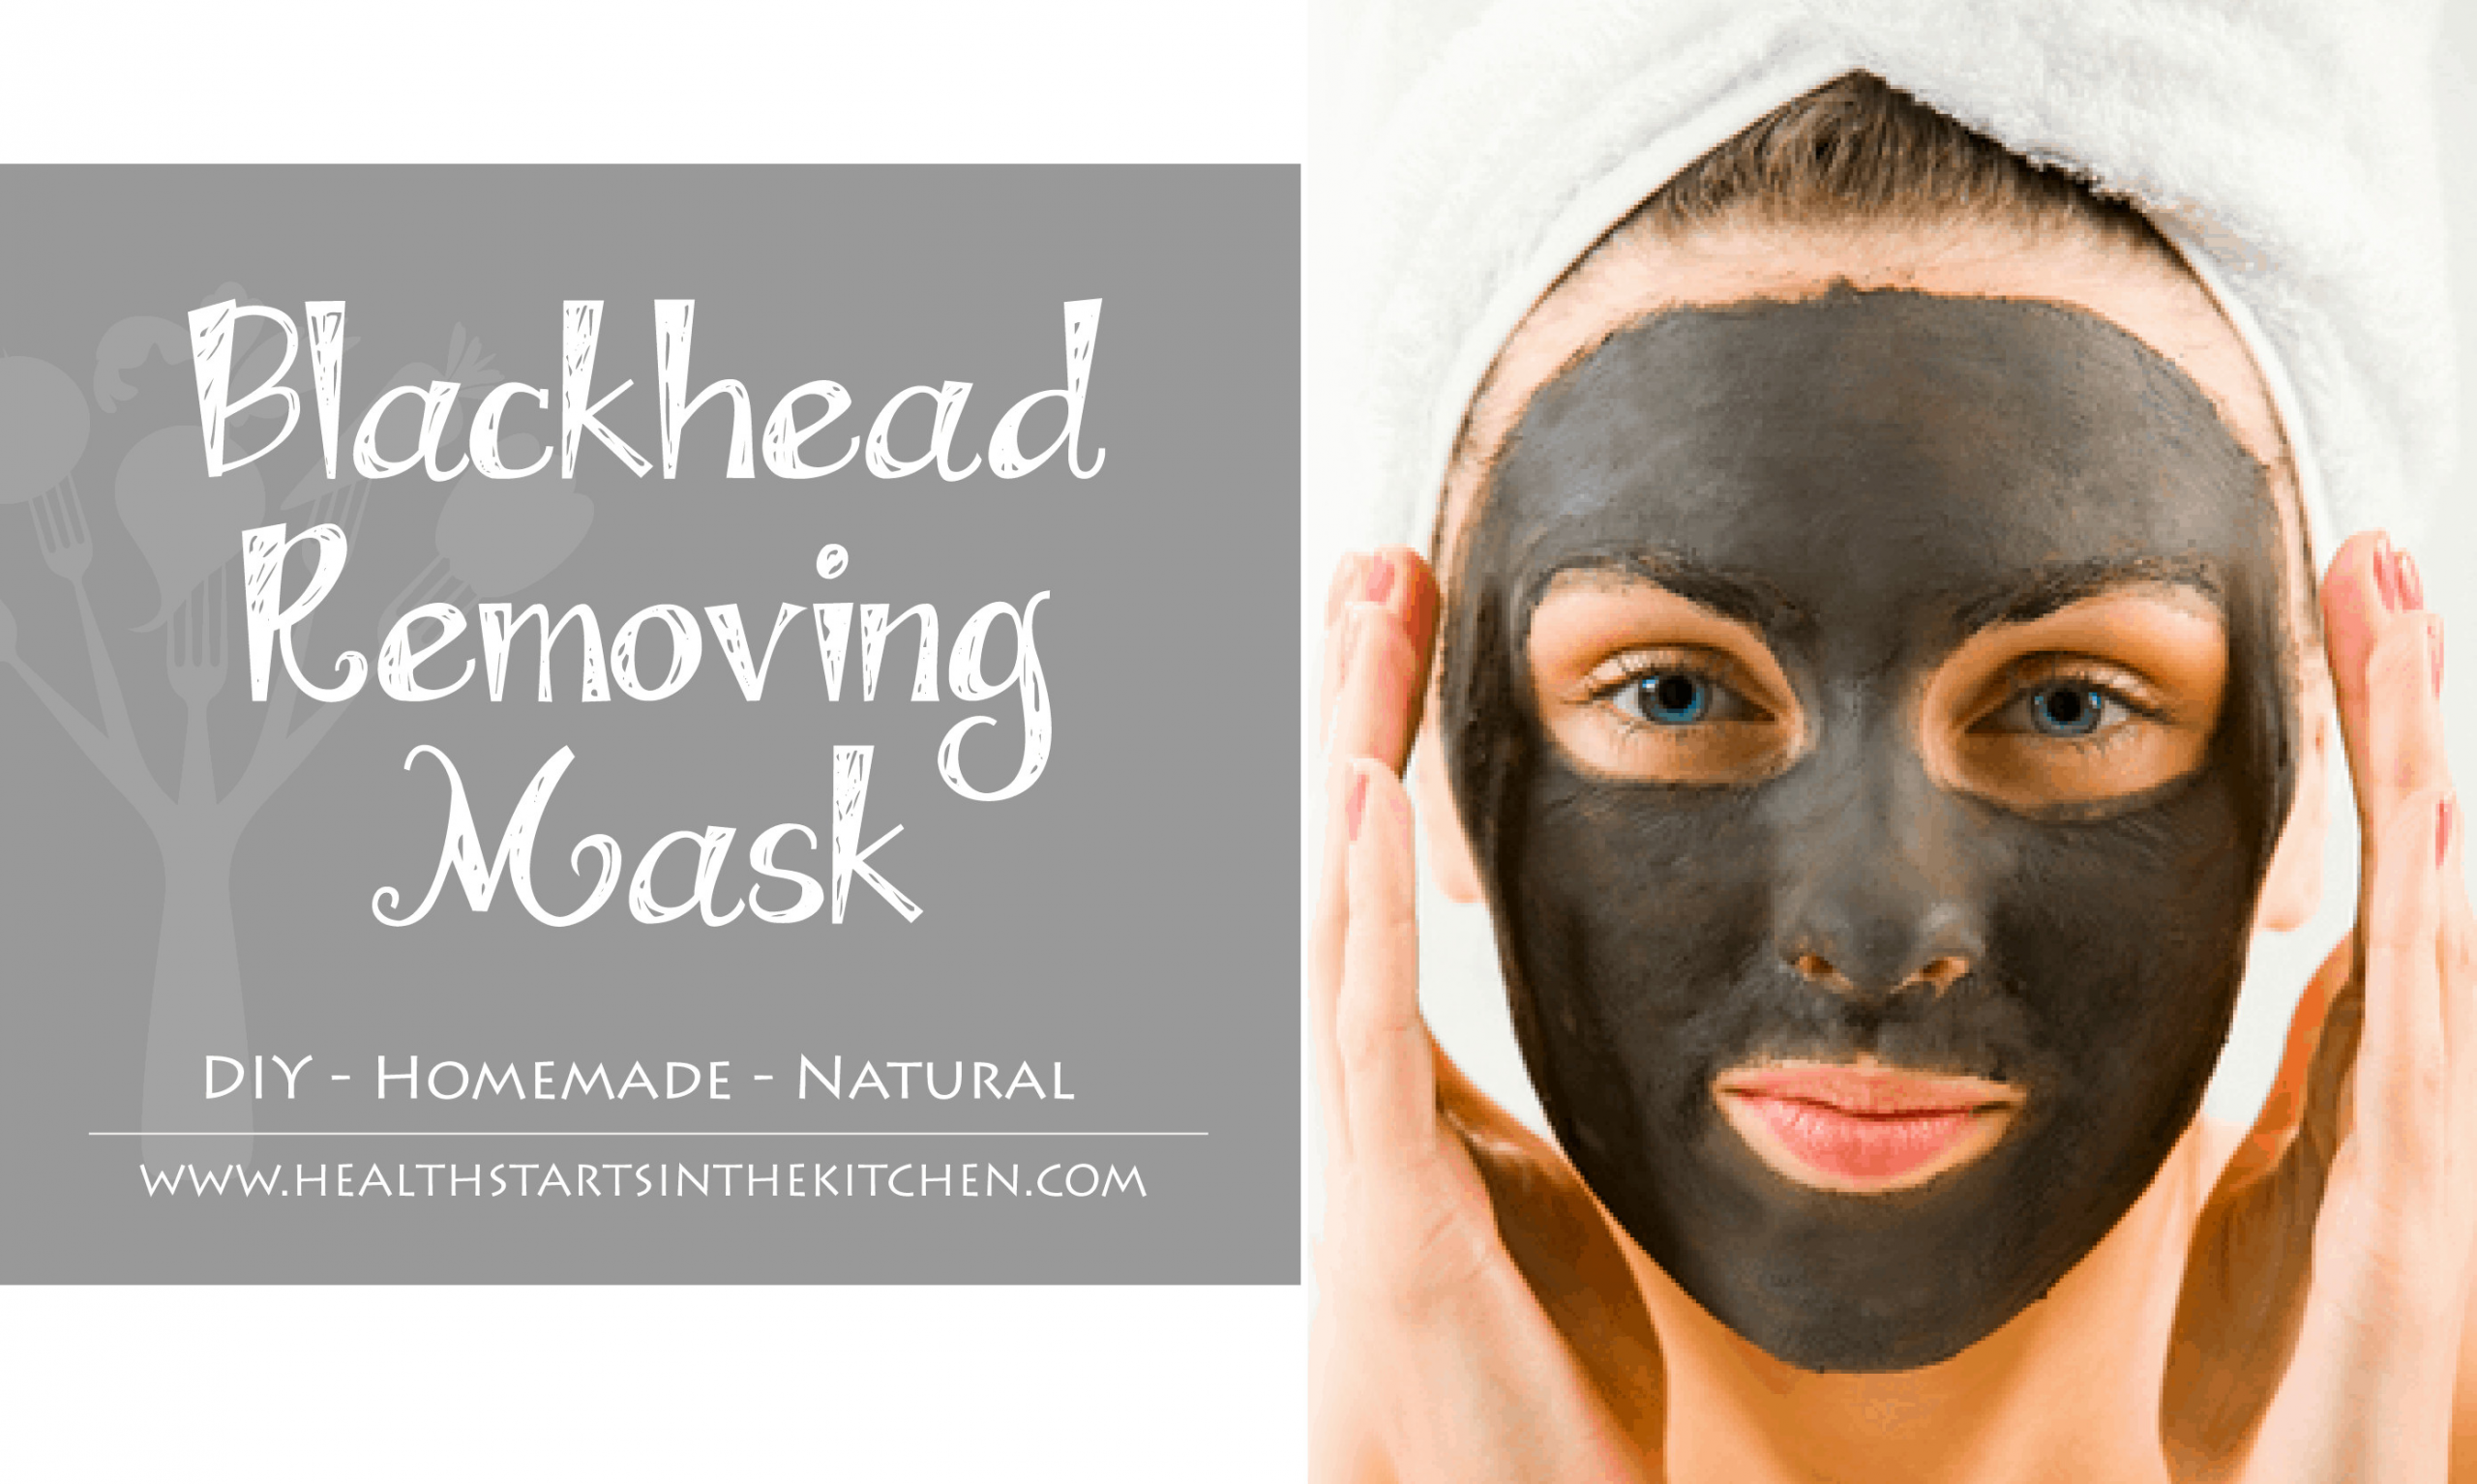 DIY Face Mask To Remove Blackheads
 DIY Homemade Blackhead Removing Mask Health Starts in